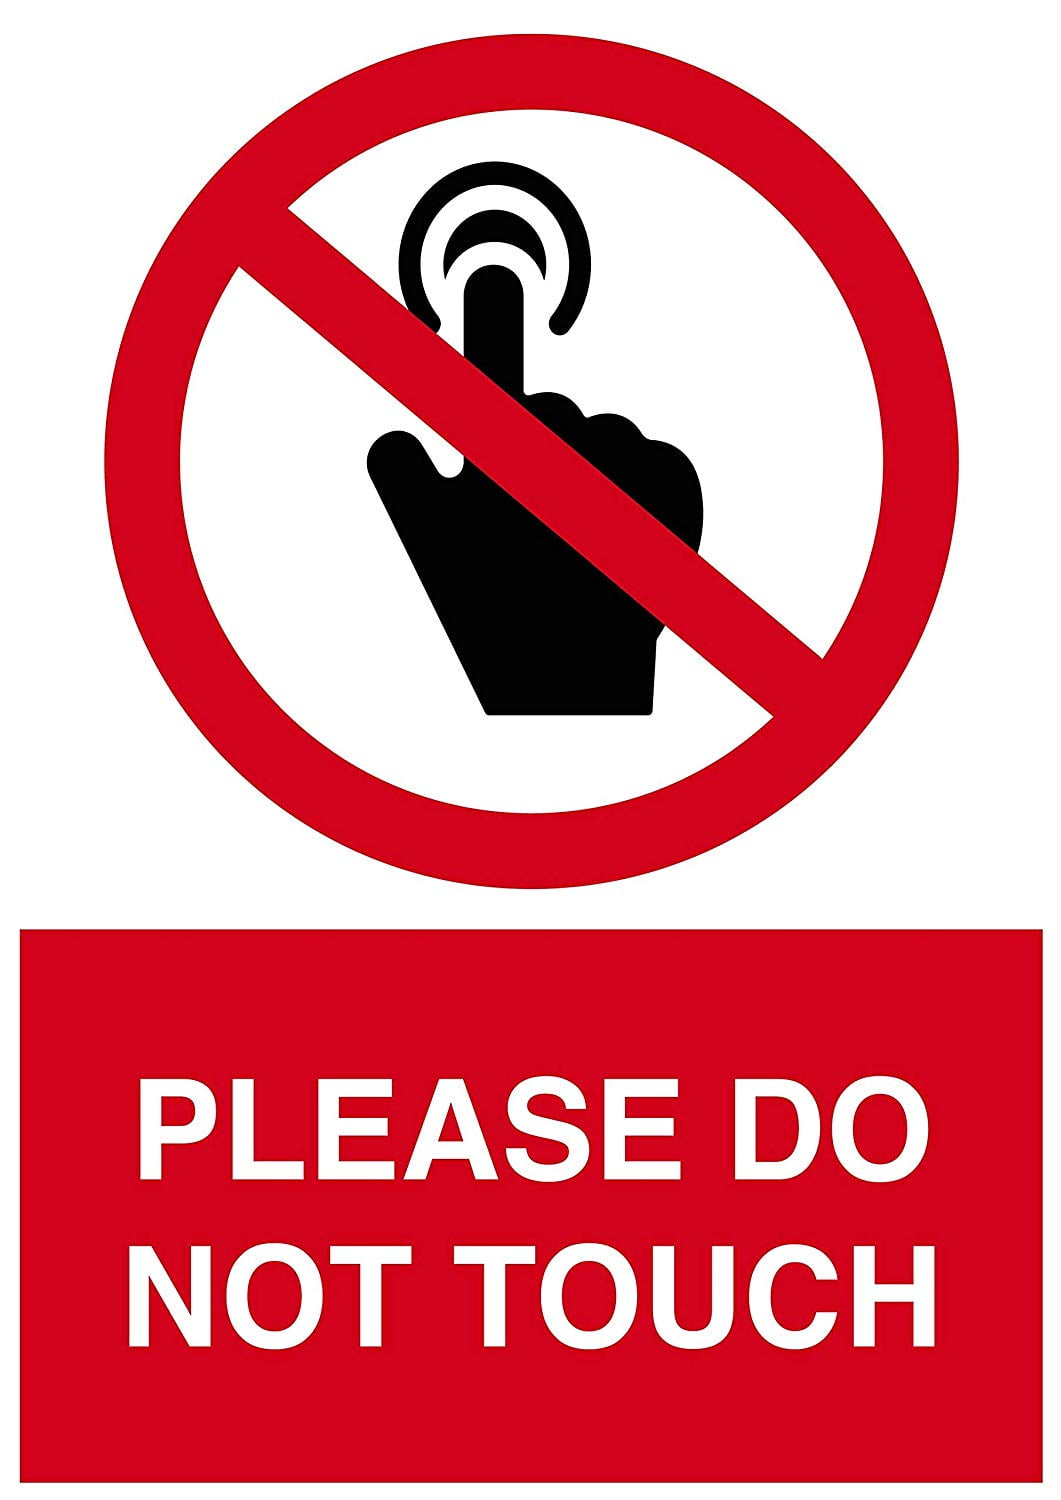 Please do not disclose. Please do not Touch. Знак don't Touch. Do not Touch sign. Warning do not Touch.